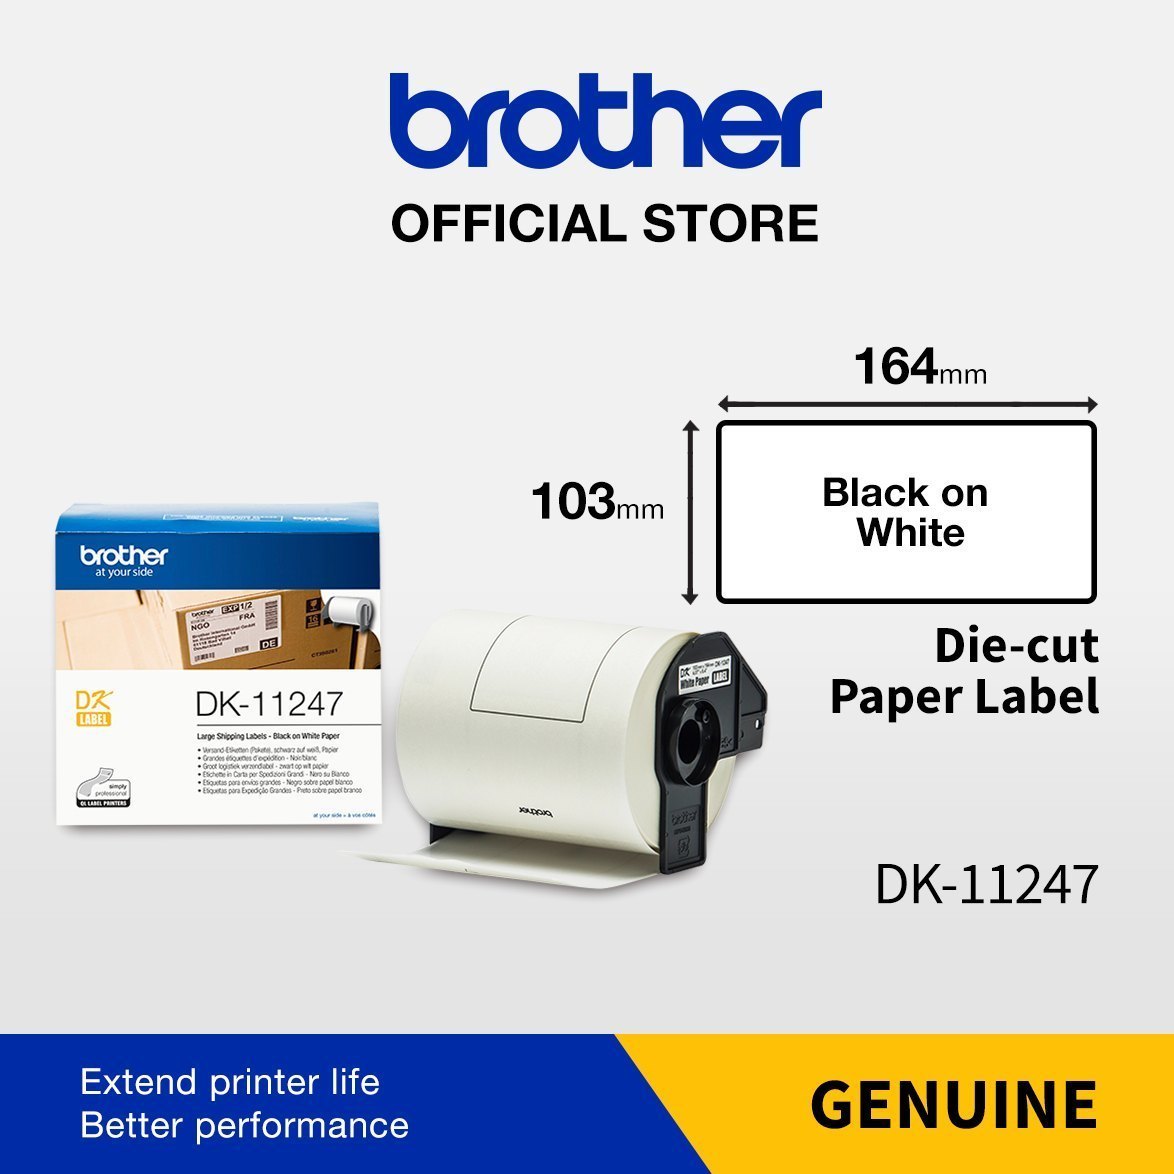 Brother DK-11247 Paper Label Roll Black on White 103mm x 164mm 180 Labels